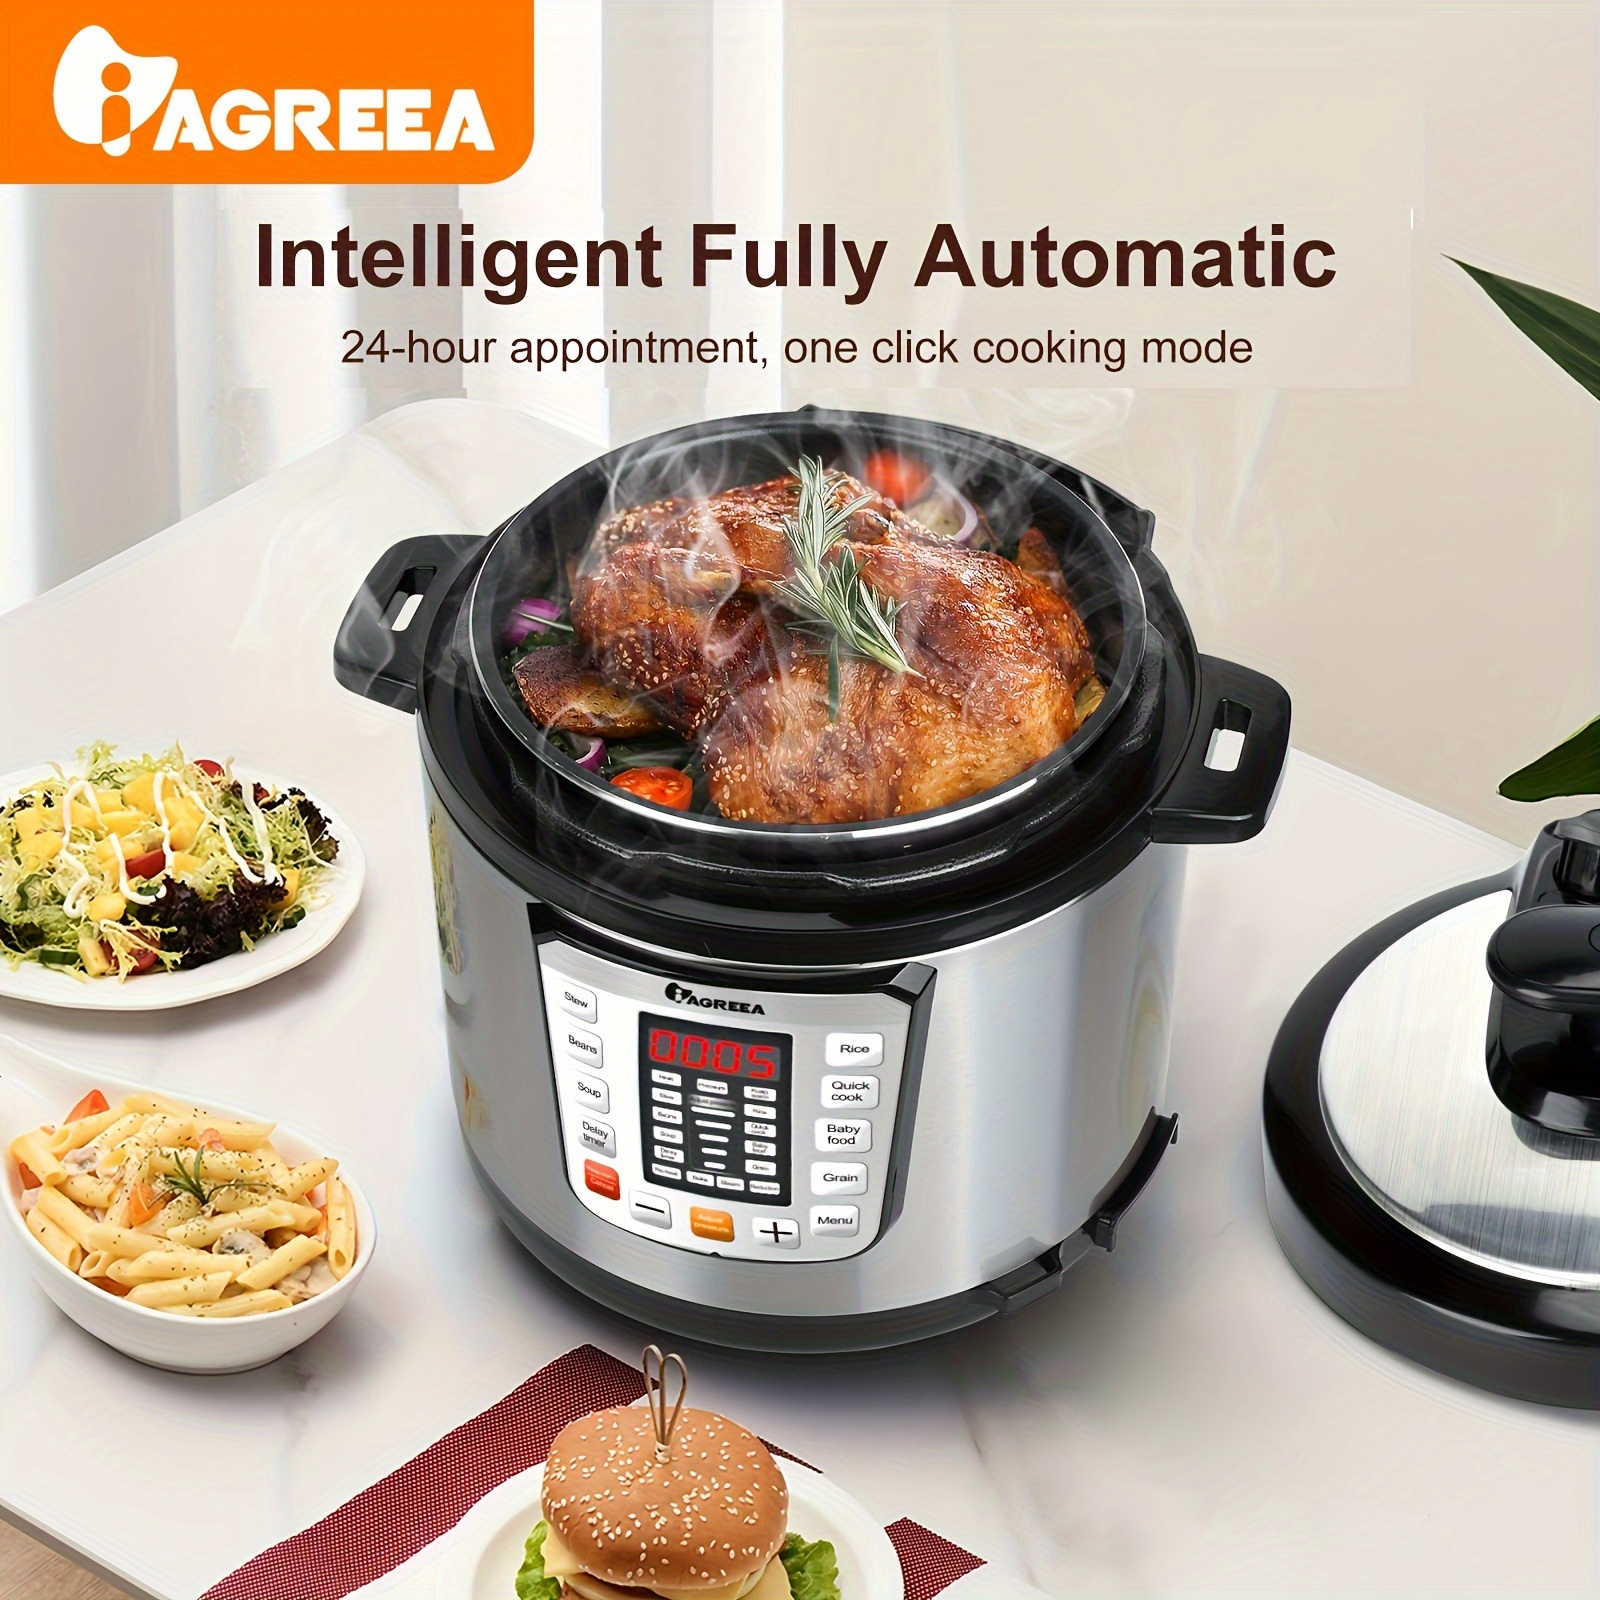 YOLLNIA Commercial Large Rice Cooker & Food warmer | 13.8QT/65 Cup cooked  rice | Non-stick Inner Pot |Auto Warmer Mode |1350W Fast Cooking